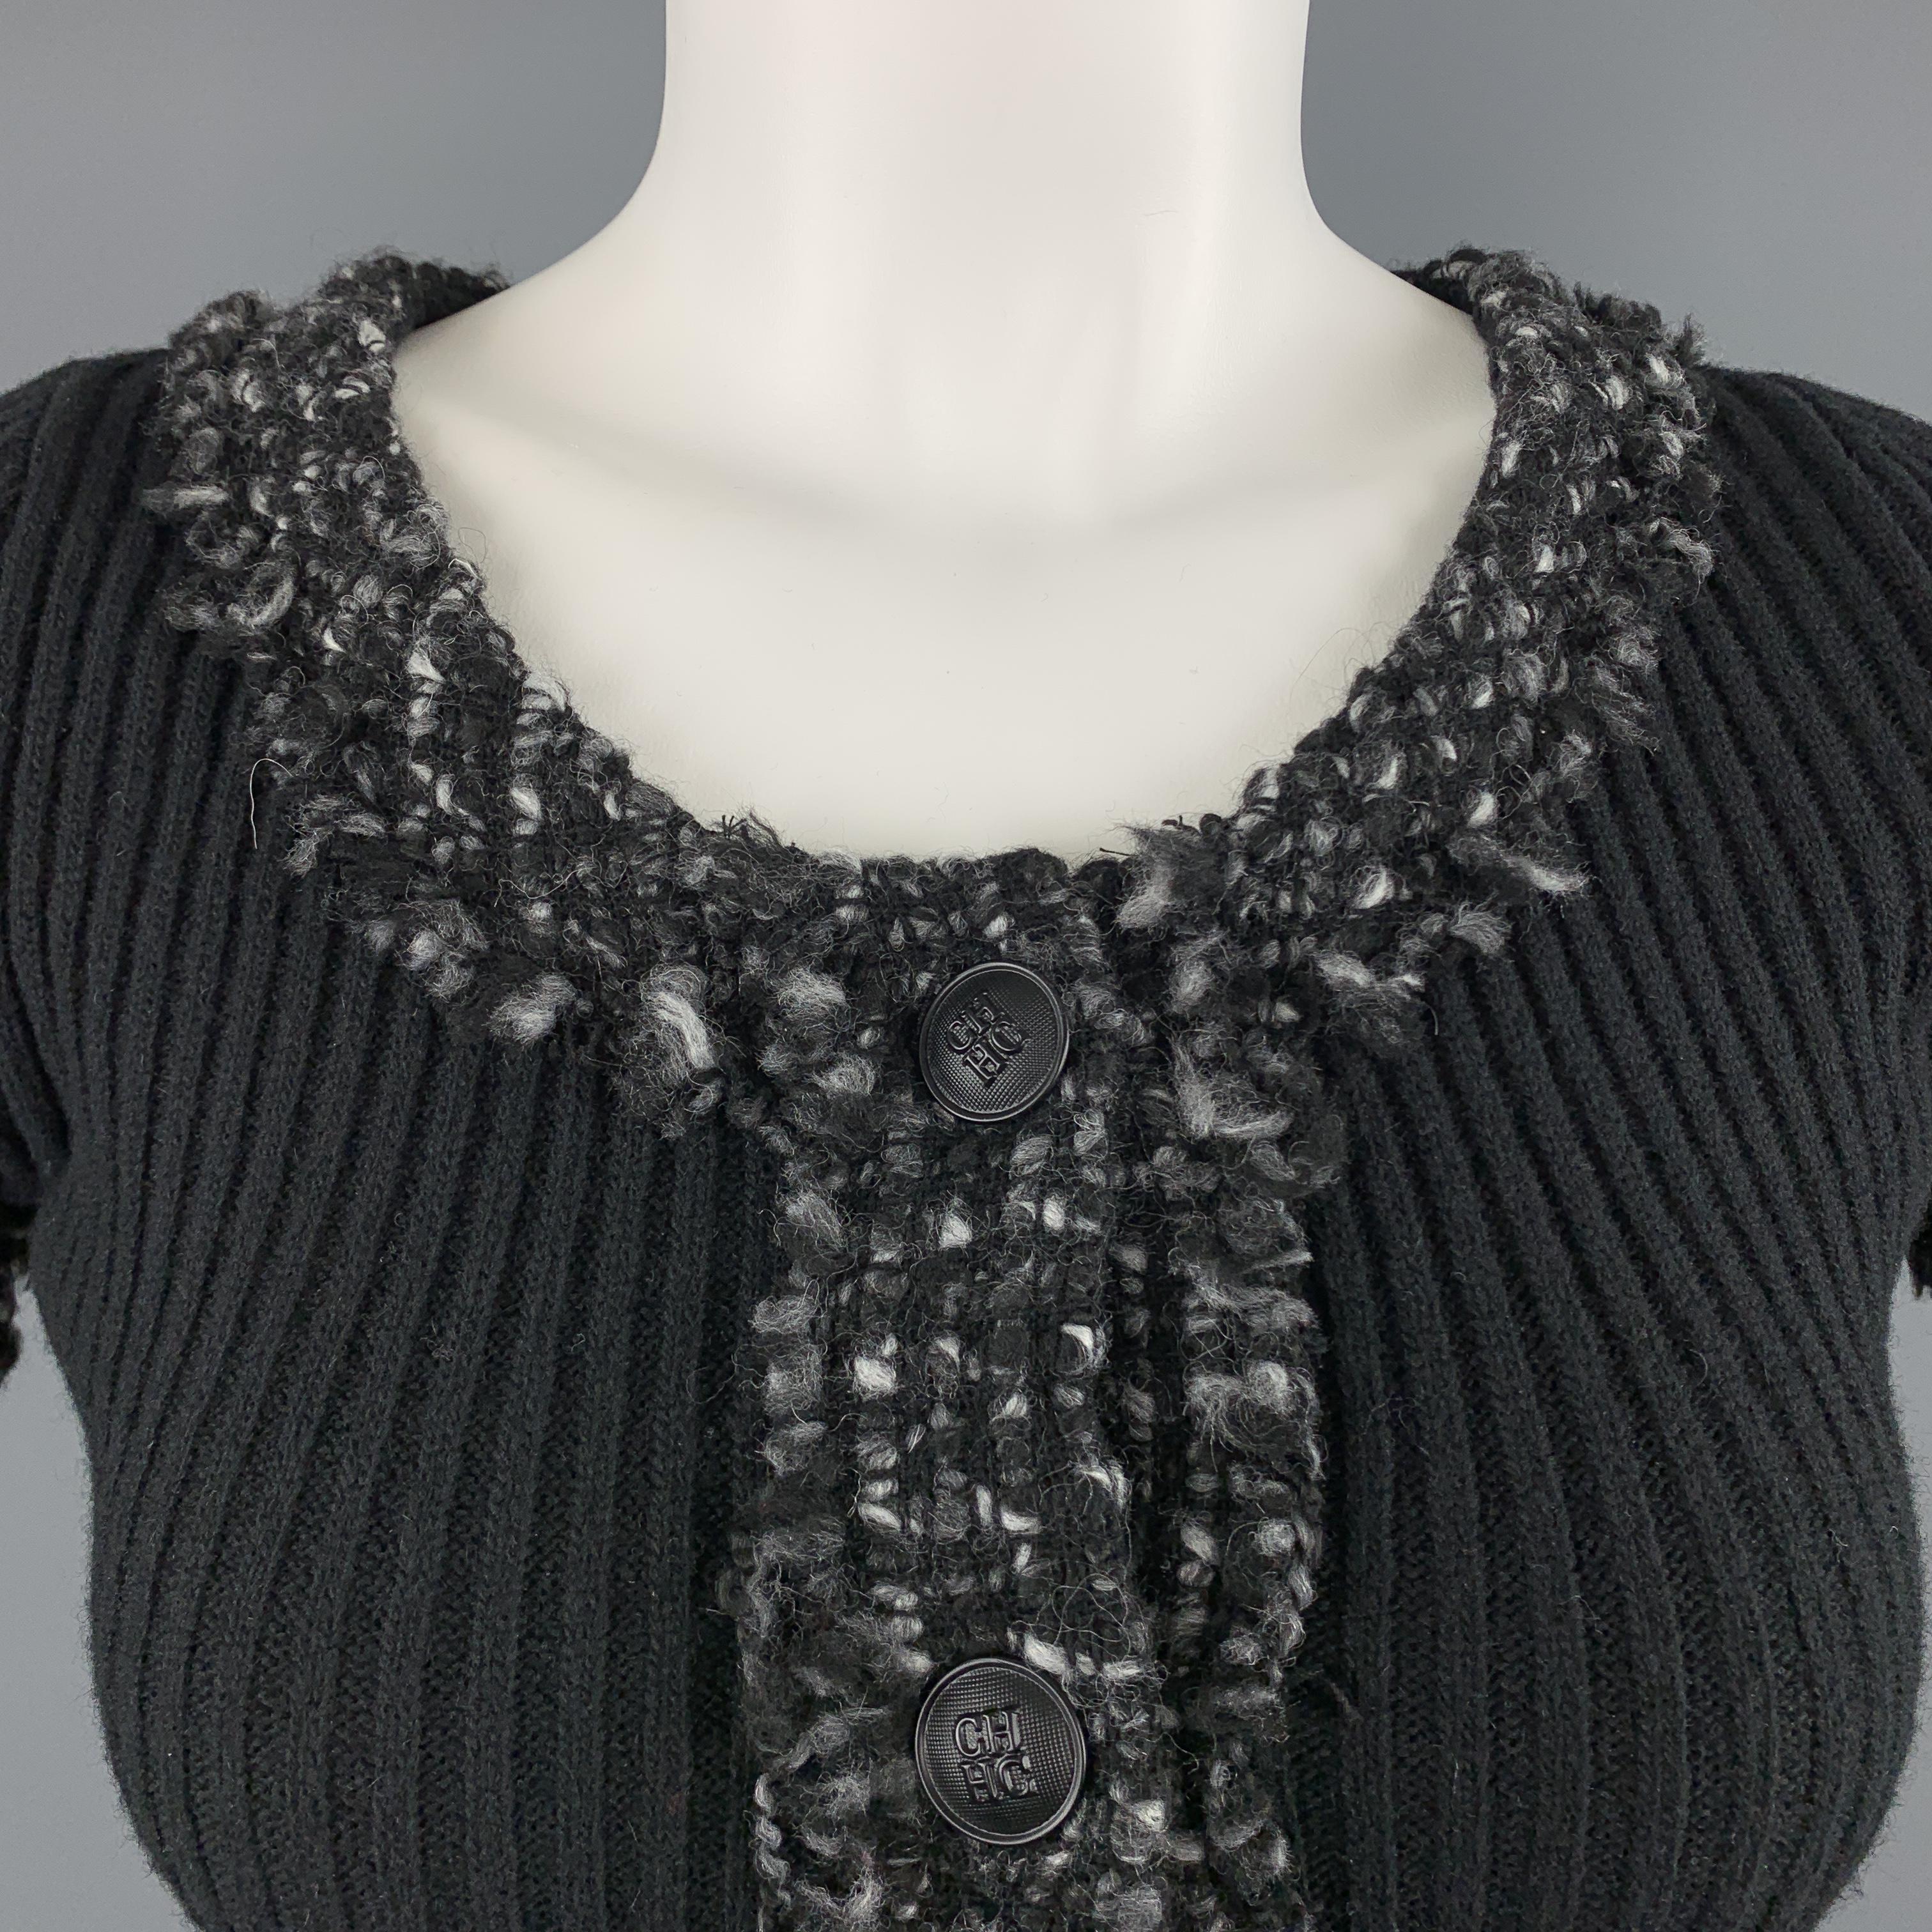 CAROLINA HERRERA pullover sweater comes in black ribbed knit with a round neckline, half button front, and gray tweed knit trim. Made in Spain.

Excellent Pre-Owned Condition.
Marked: XS

Measurements:

Shoulder: 12 in.
Bust: 32 in.
Sleeve: 7